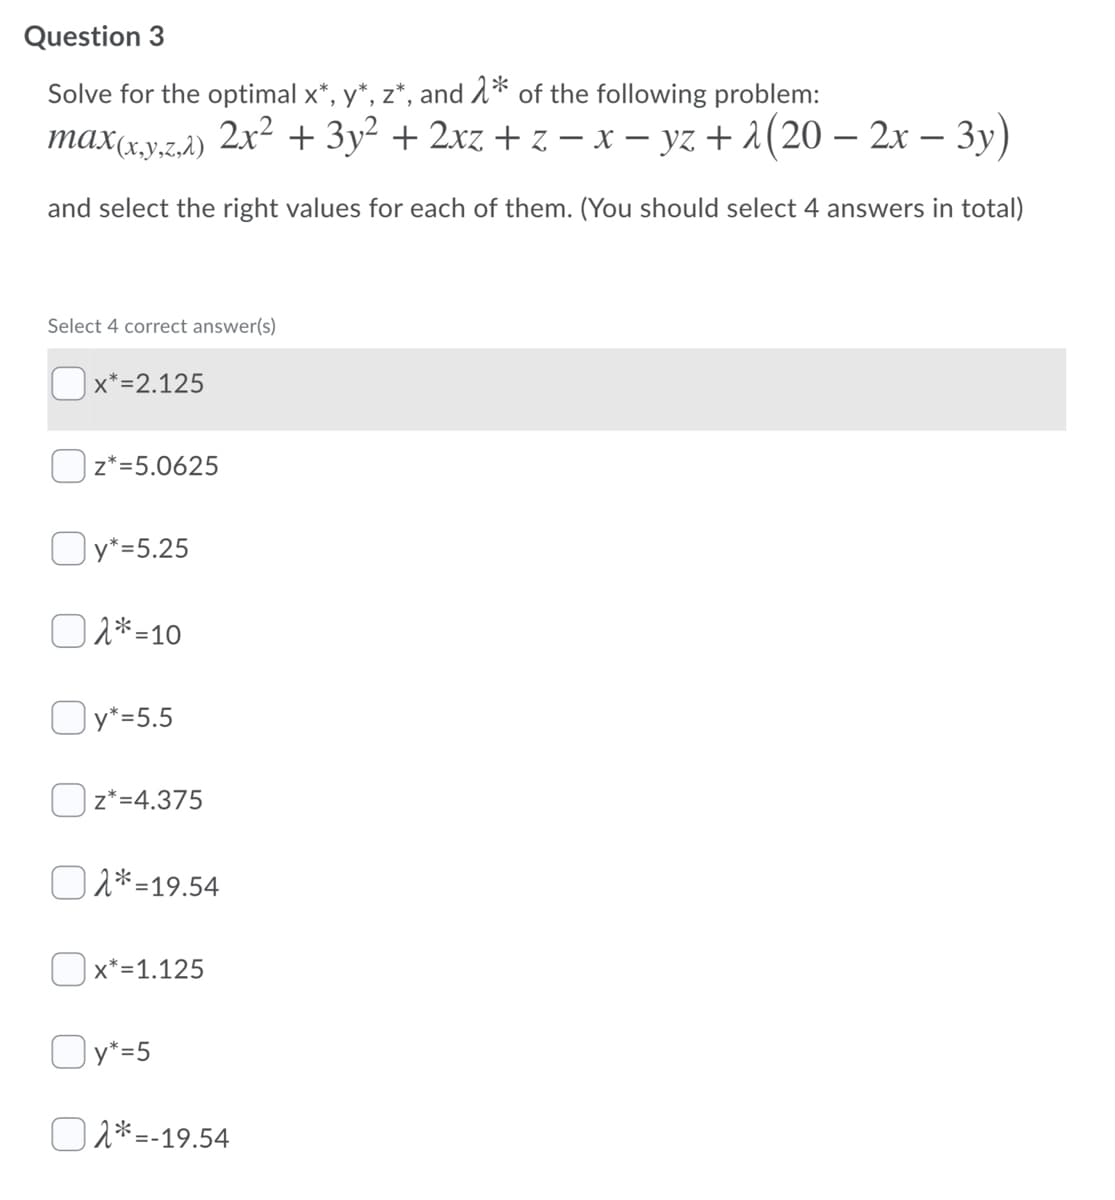 Question 3
Solve for the optimal x*, y*, z*, and 1* of the following problem:
max(xy.z.à) 2x² + 3y² + 2xz + z – x – yz + 2(20 – 2x – 3y)
and select the right values for each of them. (You should select 4 answers in total)
Select 4 correct answer(s)
Ox*=2.125
z*=5.0625
O *=5.25
O 2*=10
Oy*=5.5
Oz*=4.375
O 2*=19.54
| x*=1.125
Oy*=5
O 2*=-19.54
